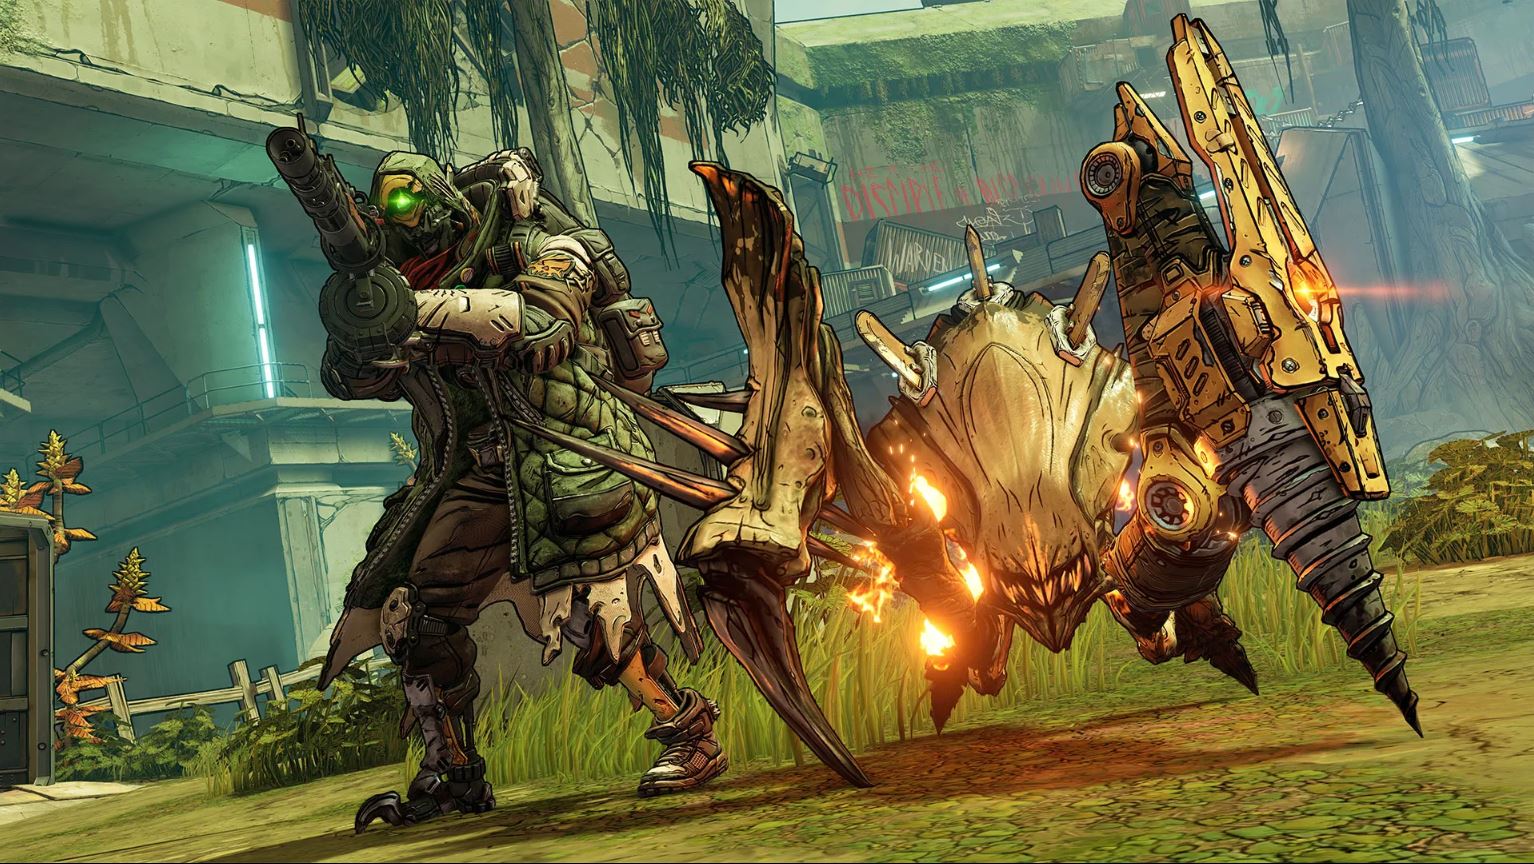 Image for Borderlands 3 seems to be doing well and breaking Gearbox records on PC despite issues